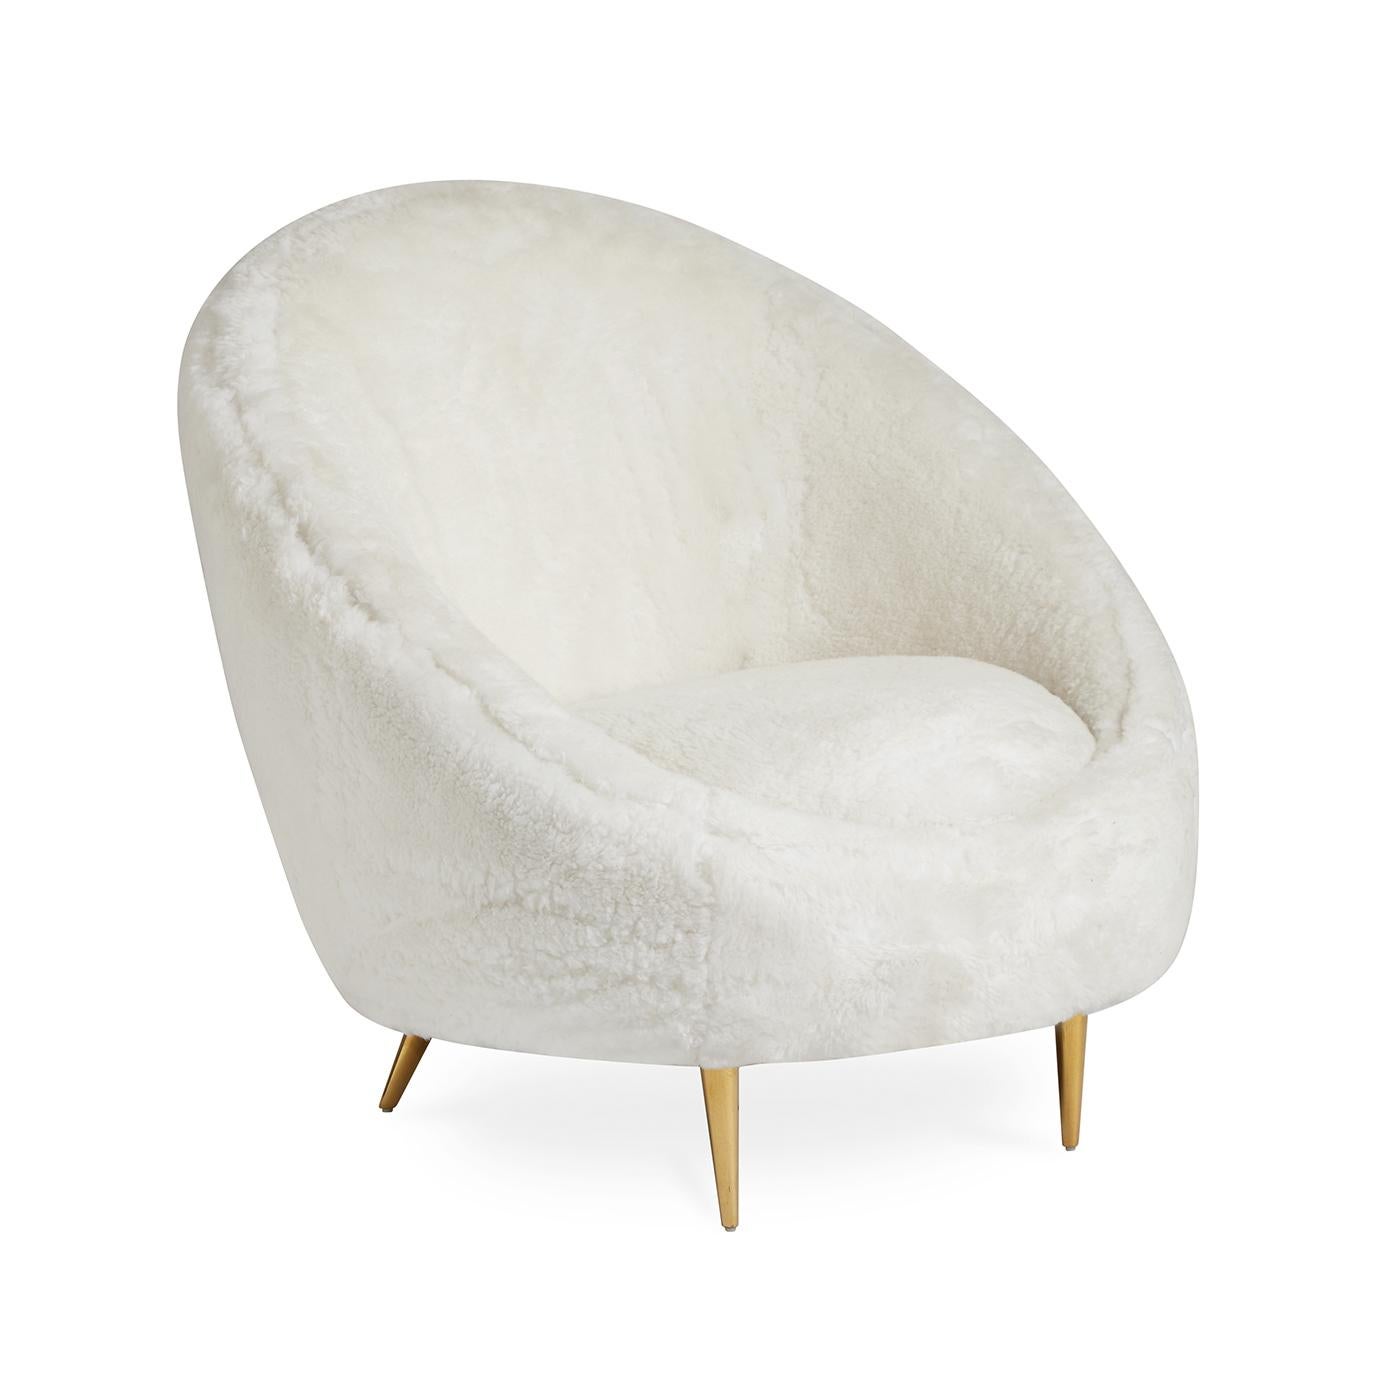 Haute Hygge. A Minimalist shape swathed in super-luxurious shearling, our Shearling Ether Chair is the perfect combination of ultra-cozy and ultra-luxe. The capsule-inspired Silhouette provides surprising comfort, the sumptuous upholstery is